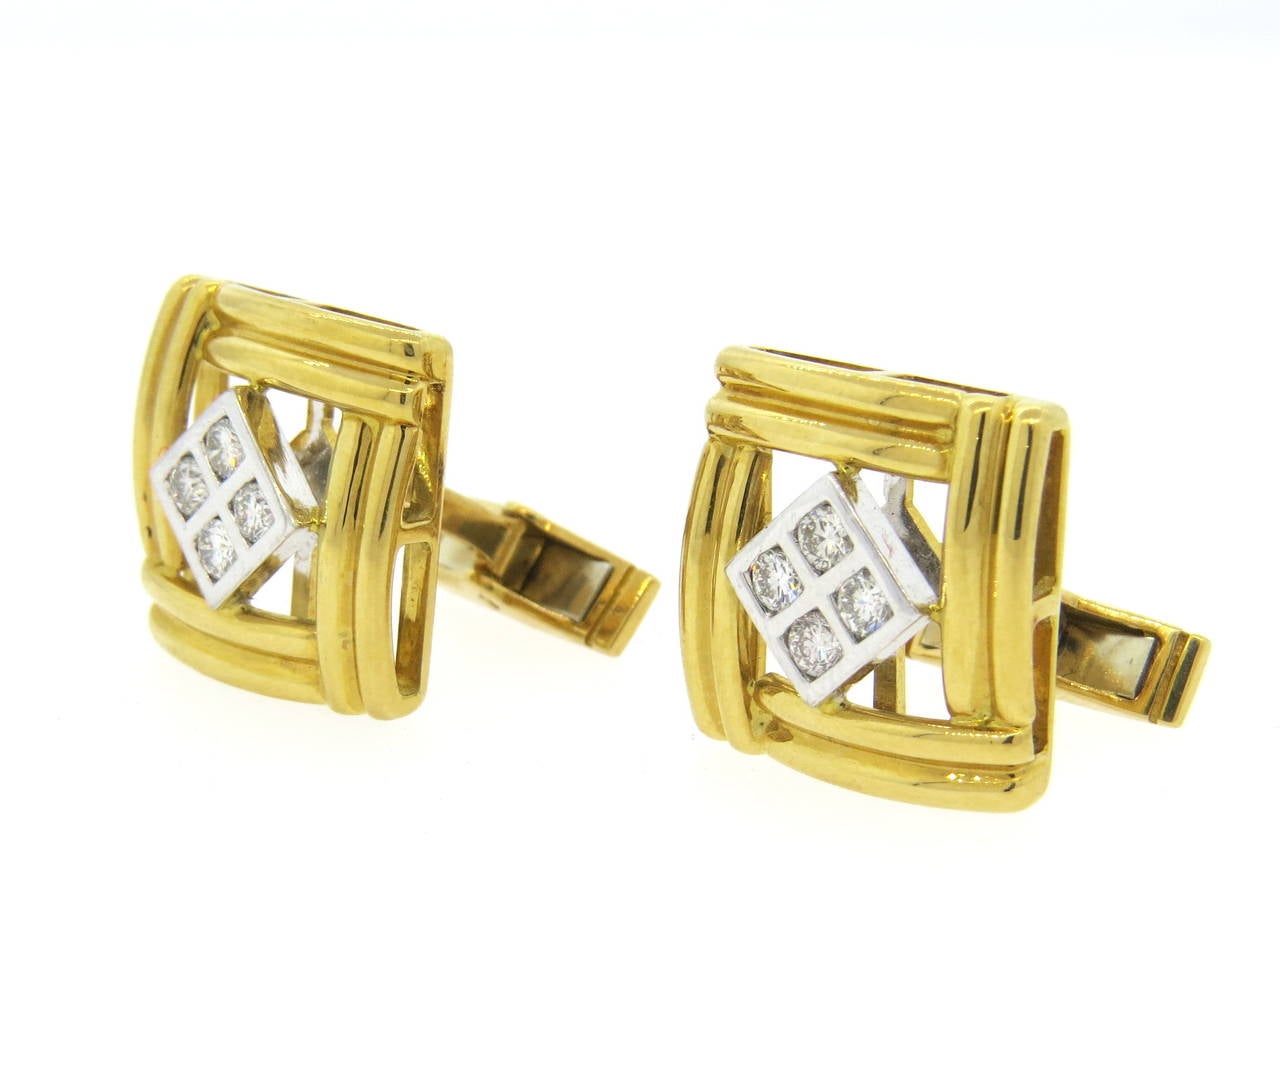 18k gold cufflinks, set with approximately 0.40ctw in H/VS diamonds. Cufflink top is 17mm x 16mm. Weight - 14.6 grams